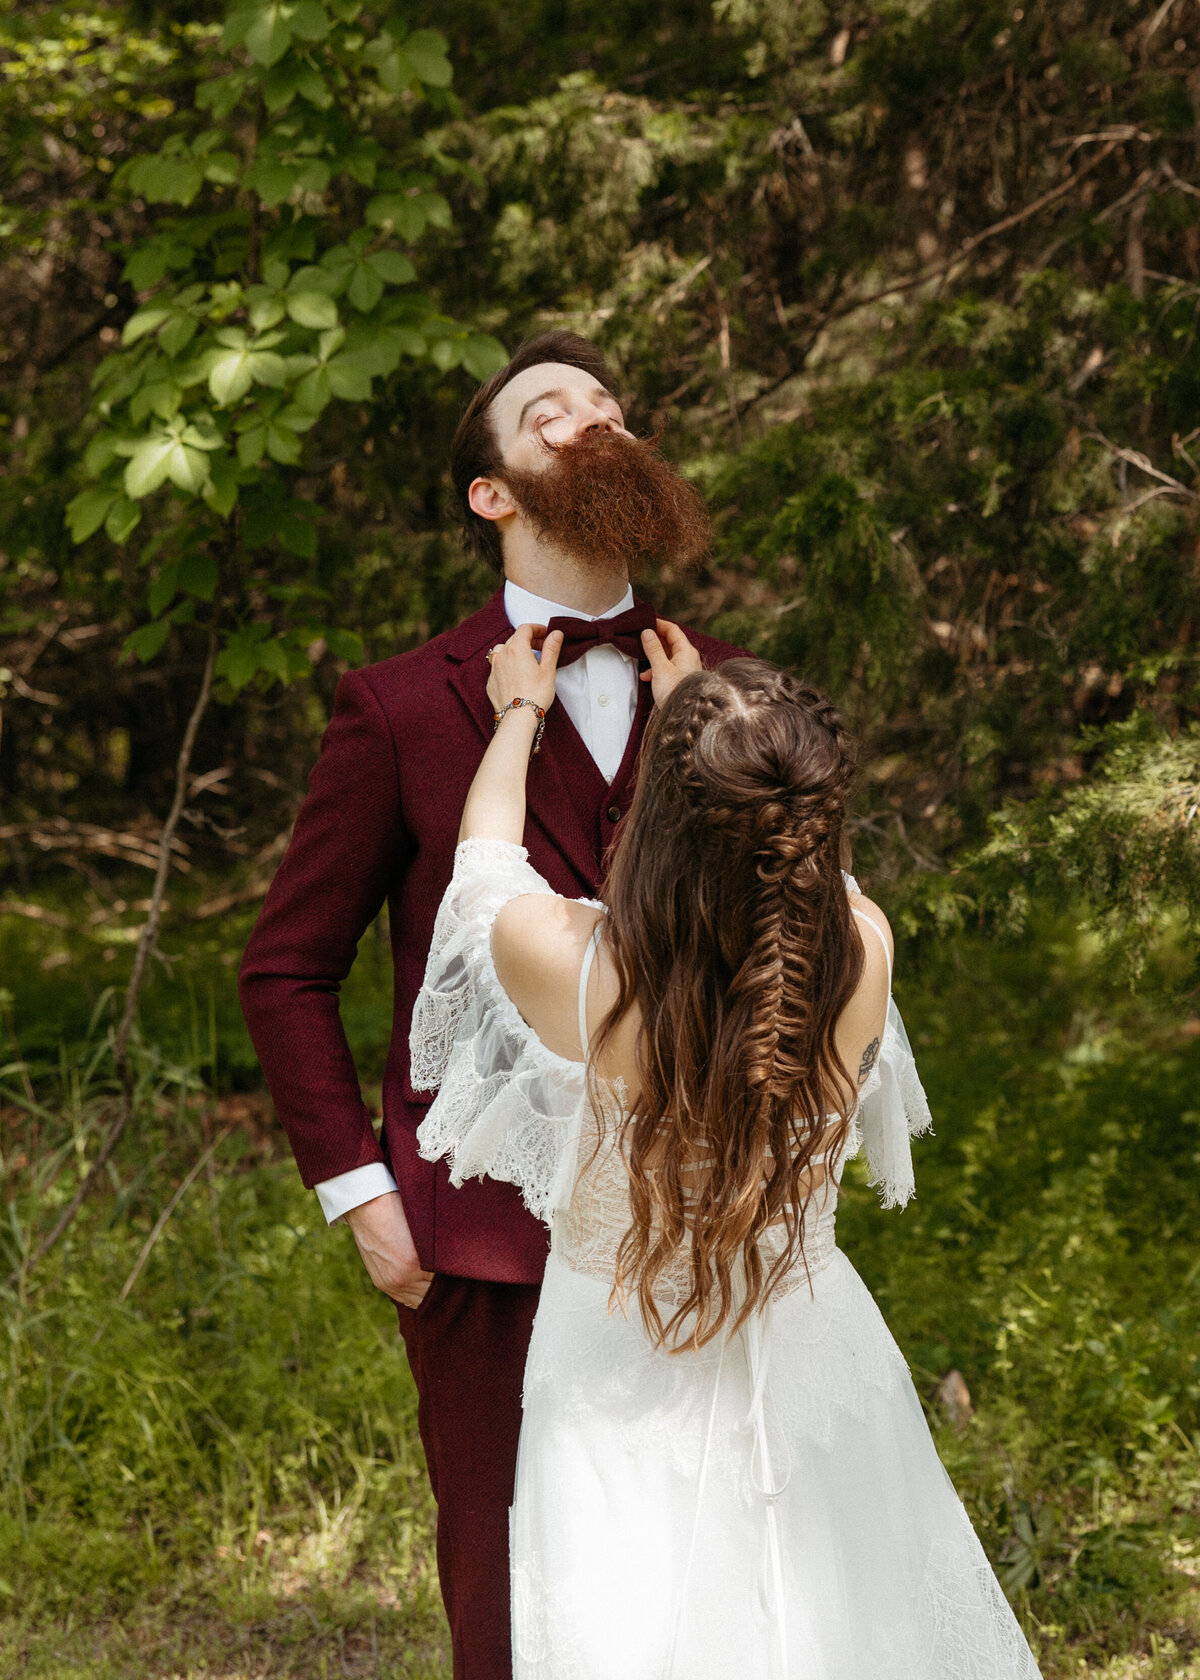 Bride playfully adjusting the bow tie of her groom who is clad in a maroon suit, both surrounded by lush greenery